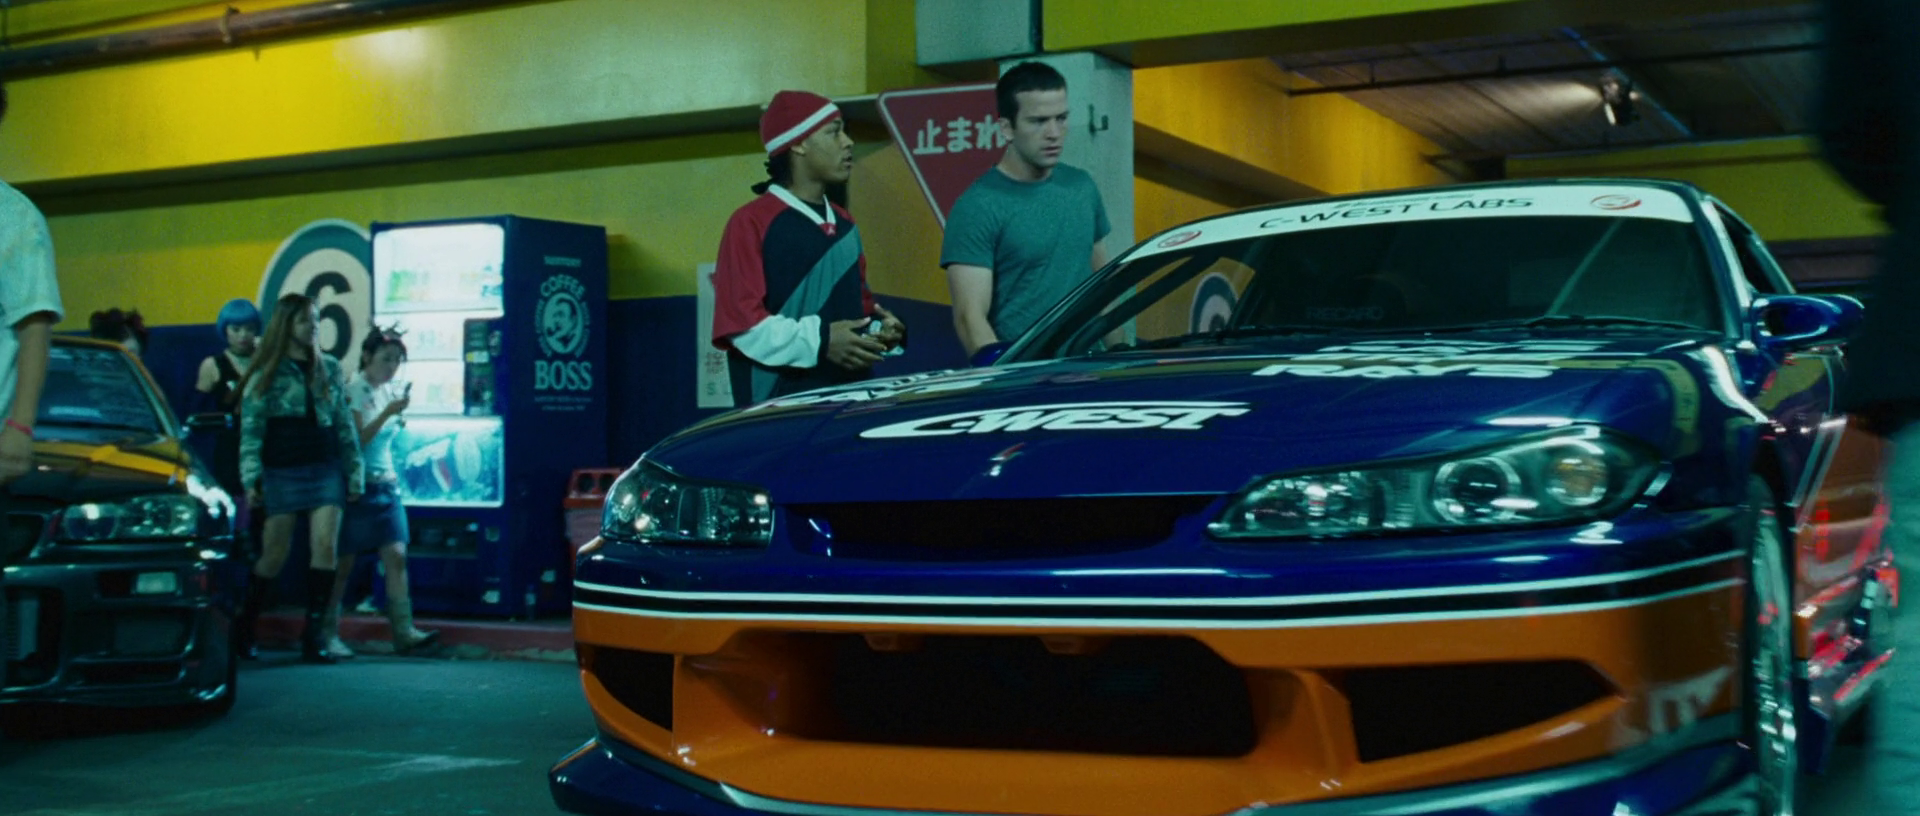 2001 Nissan Silvia S15 Spec-S | The Fast and the Furious Wiki | Fandom